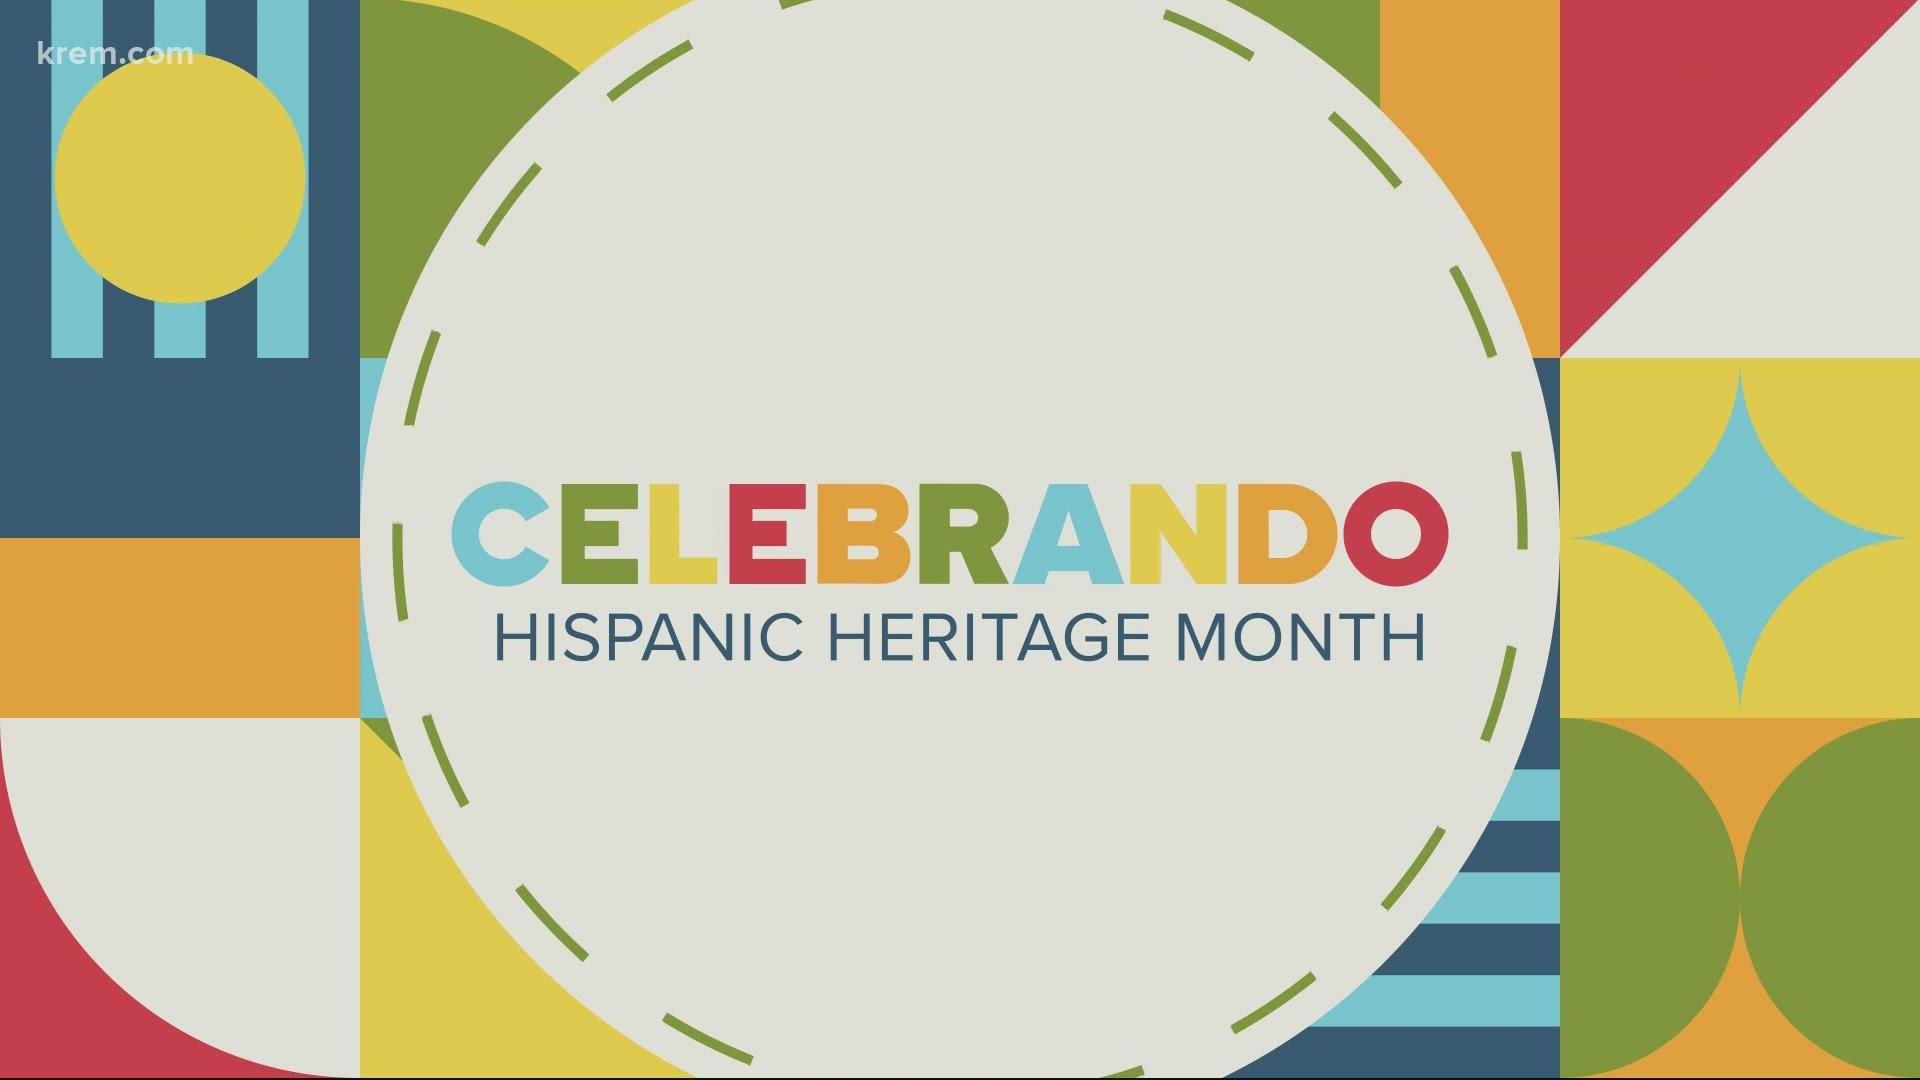 Hispanic Heritage Month celebrates the contributions of American citizens whose ancestors came from Spain, Mexico, the Caribbean and Central and South America.